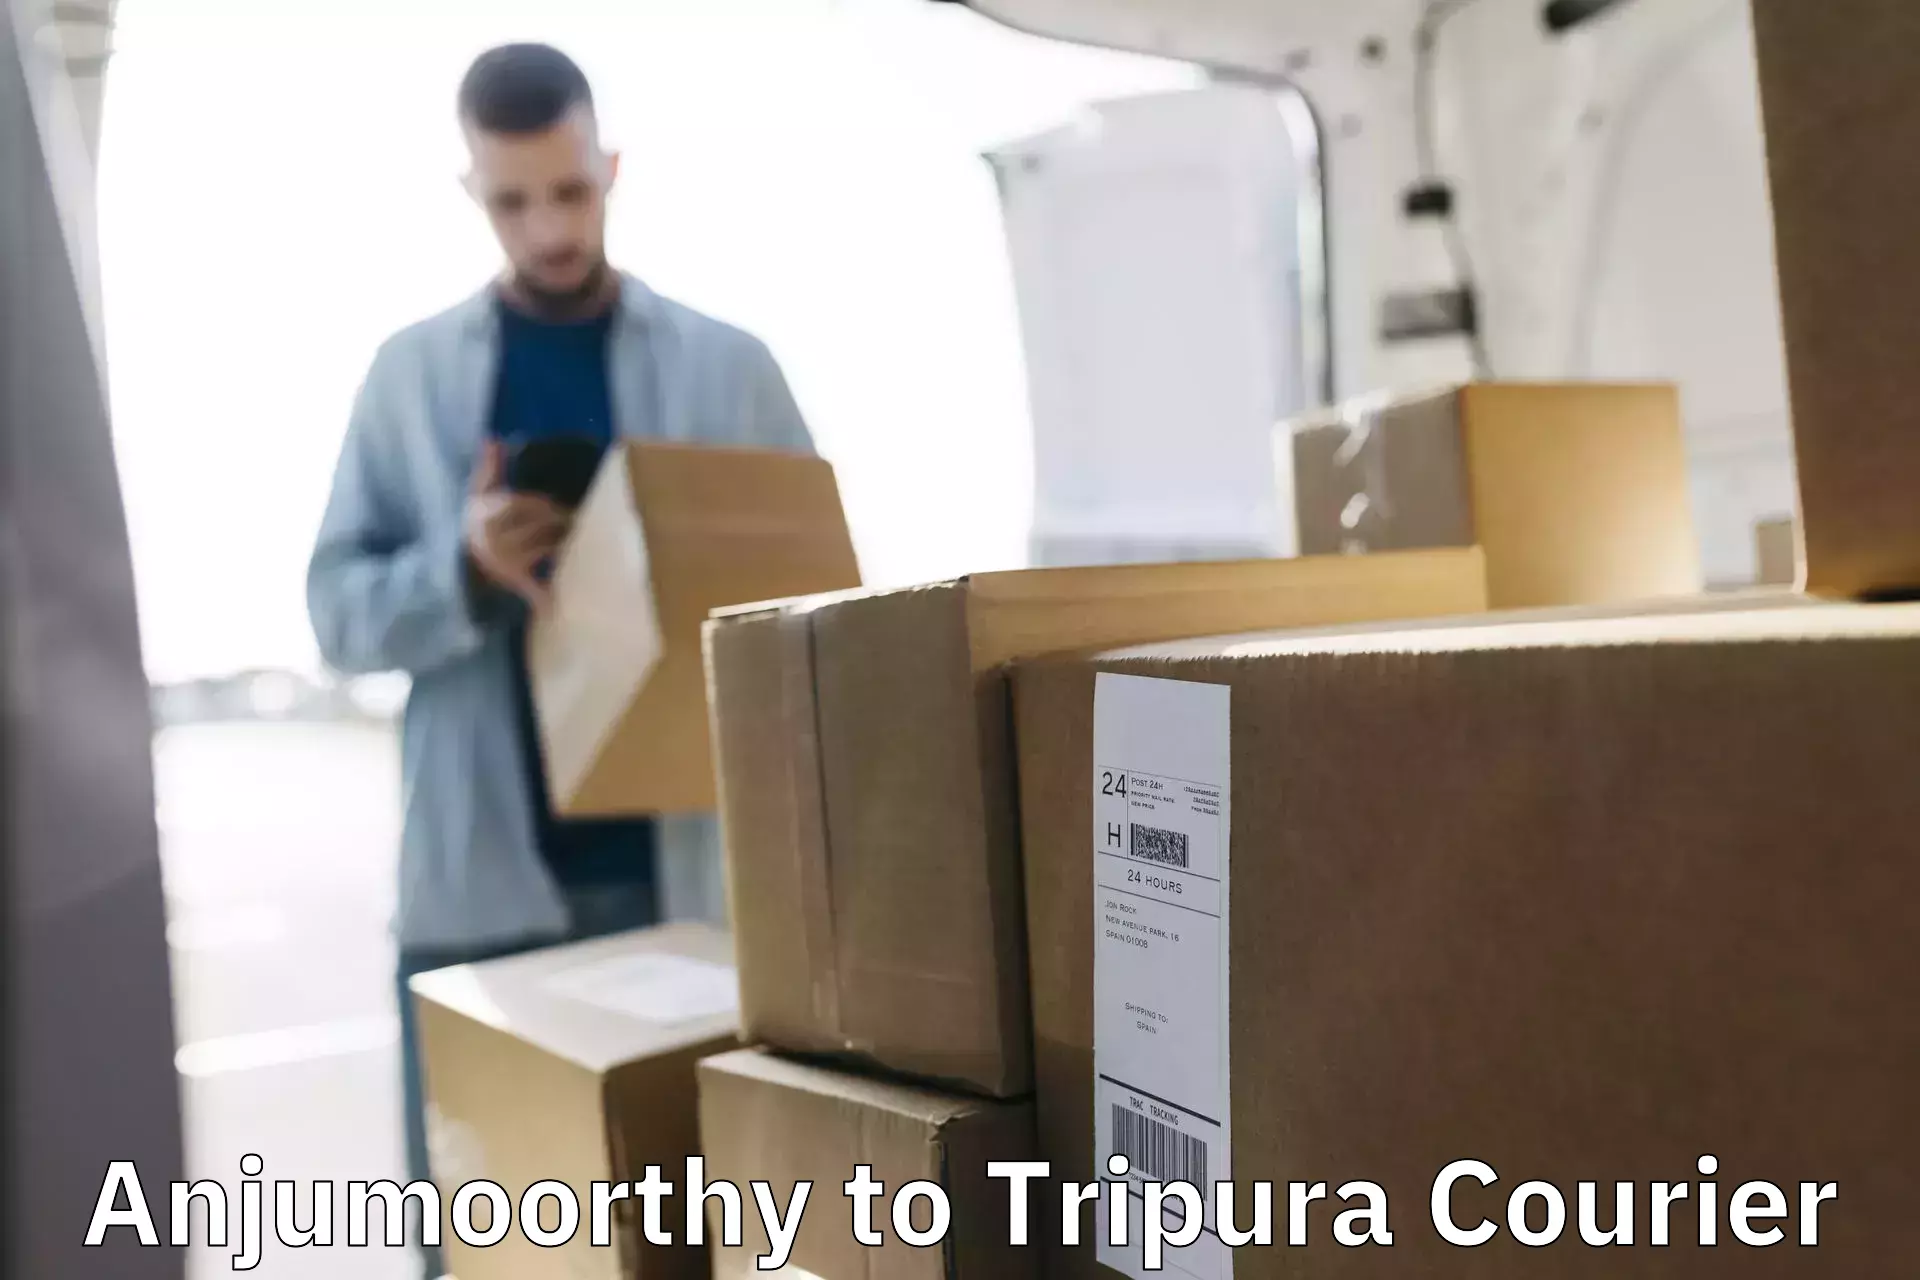 Air courier services Anjumoorthy to Tripura